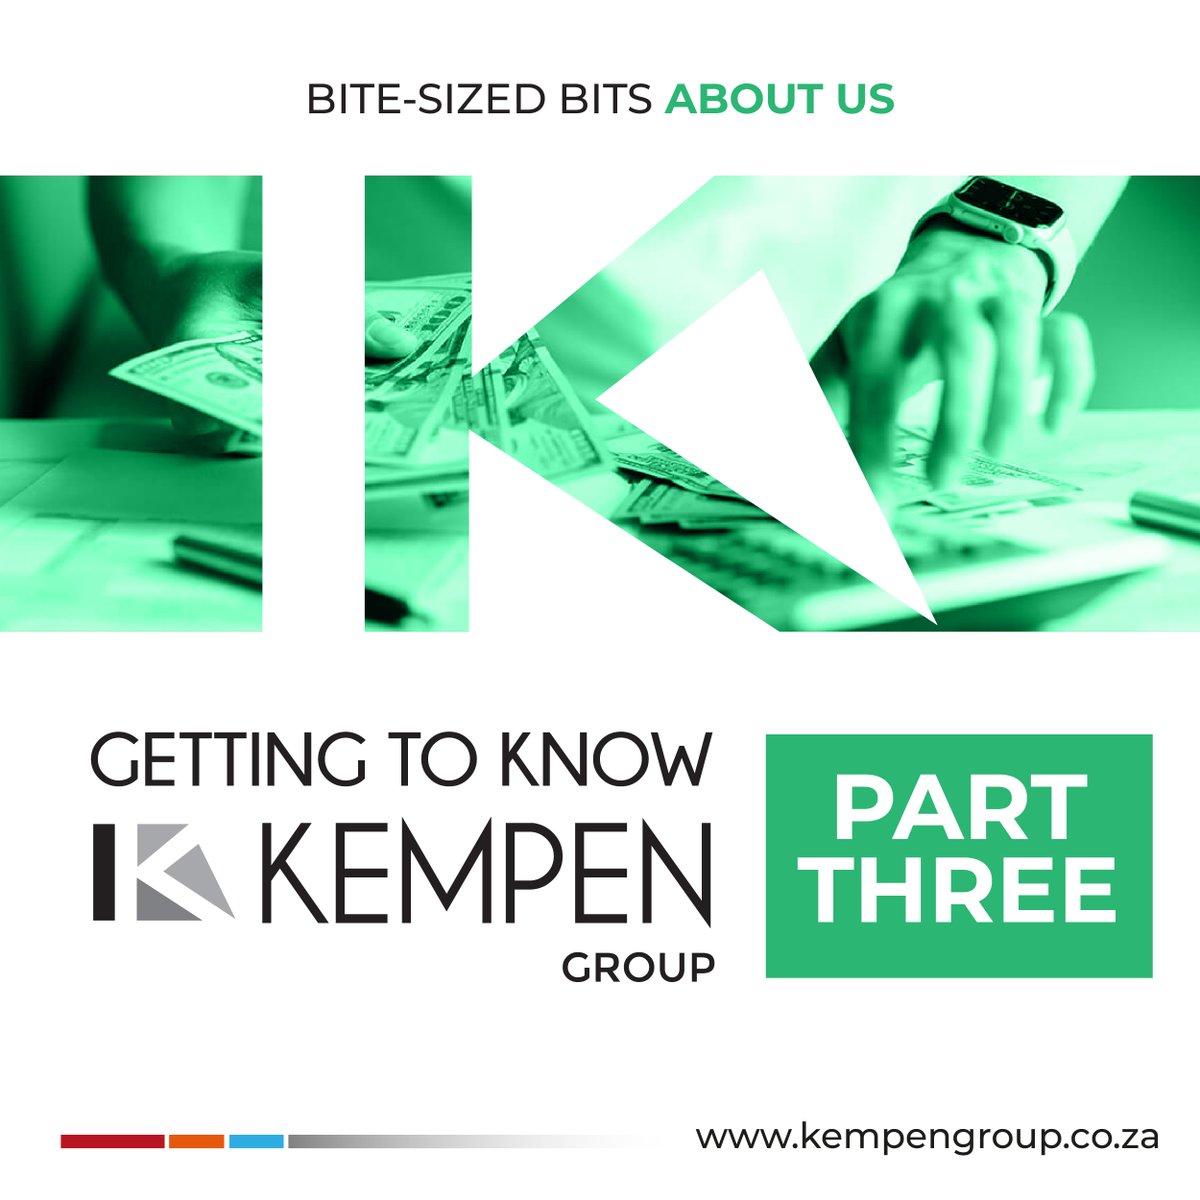 If you are looking to expand your business to South Africa or venture abroad, #KEMPENGroup has you covered! Our #internationalconnections can open doors for your global ambitions.

Let’s chat.
📱082 940 6700
📧ignus@kempengroup.co.za

#AboutUs #GlobalBusiness #AccountingFirm